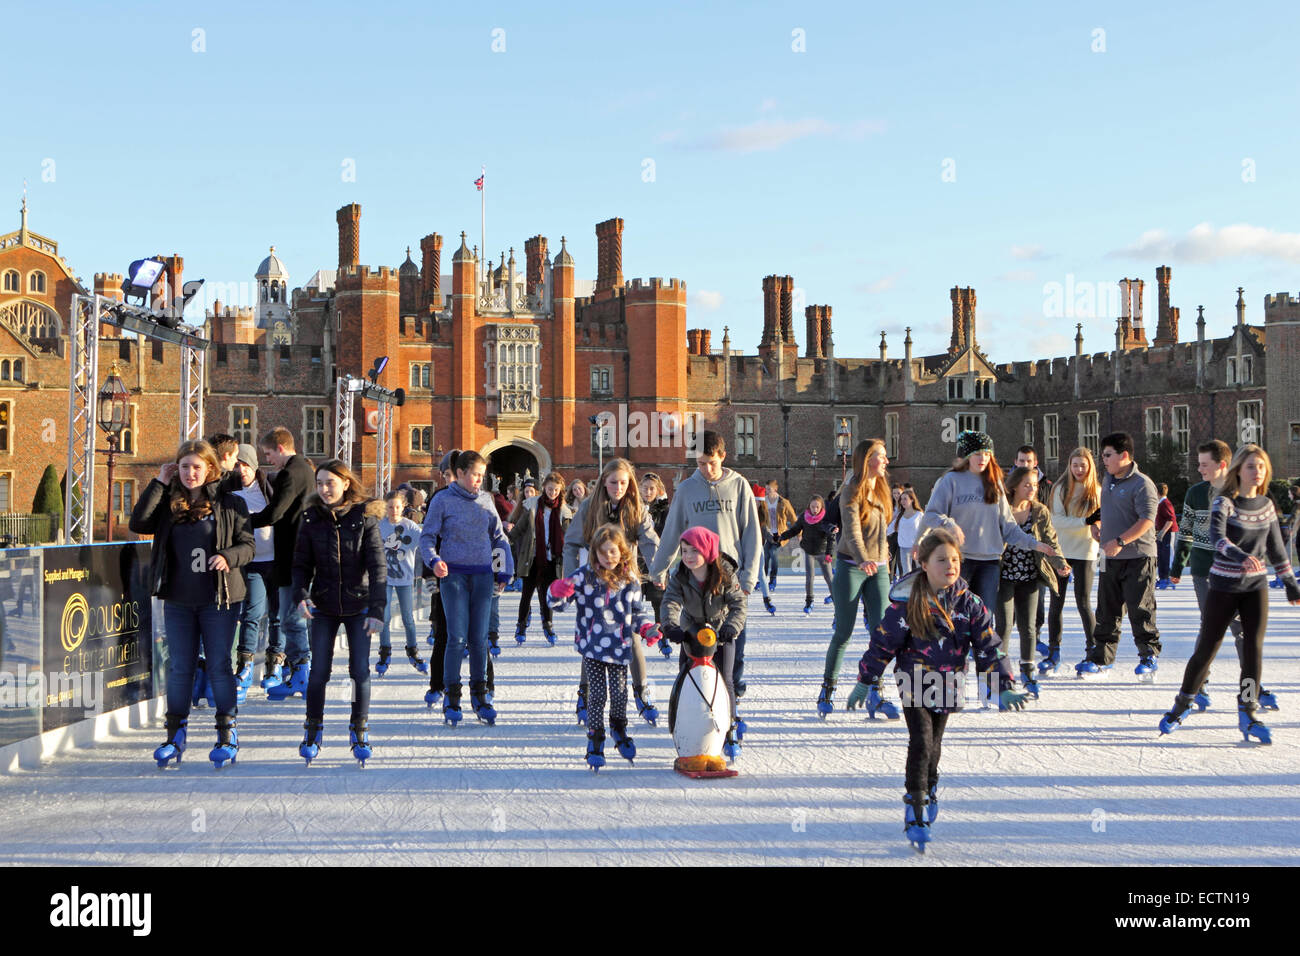 Hampton Court, SW London, England UK. 19th December 2014. On chilly but sunny day in SW London, friends, families and school parties enjoy festive fun at the Ice Rink in the grounds of Hampton Court Palace. It is a magical setting, surrounded by the Tudor Palace of Henry VIII, the River Thames and the gardens of Hampton Court. Stock Photo